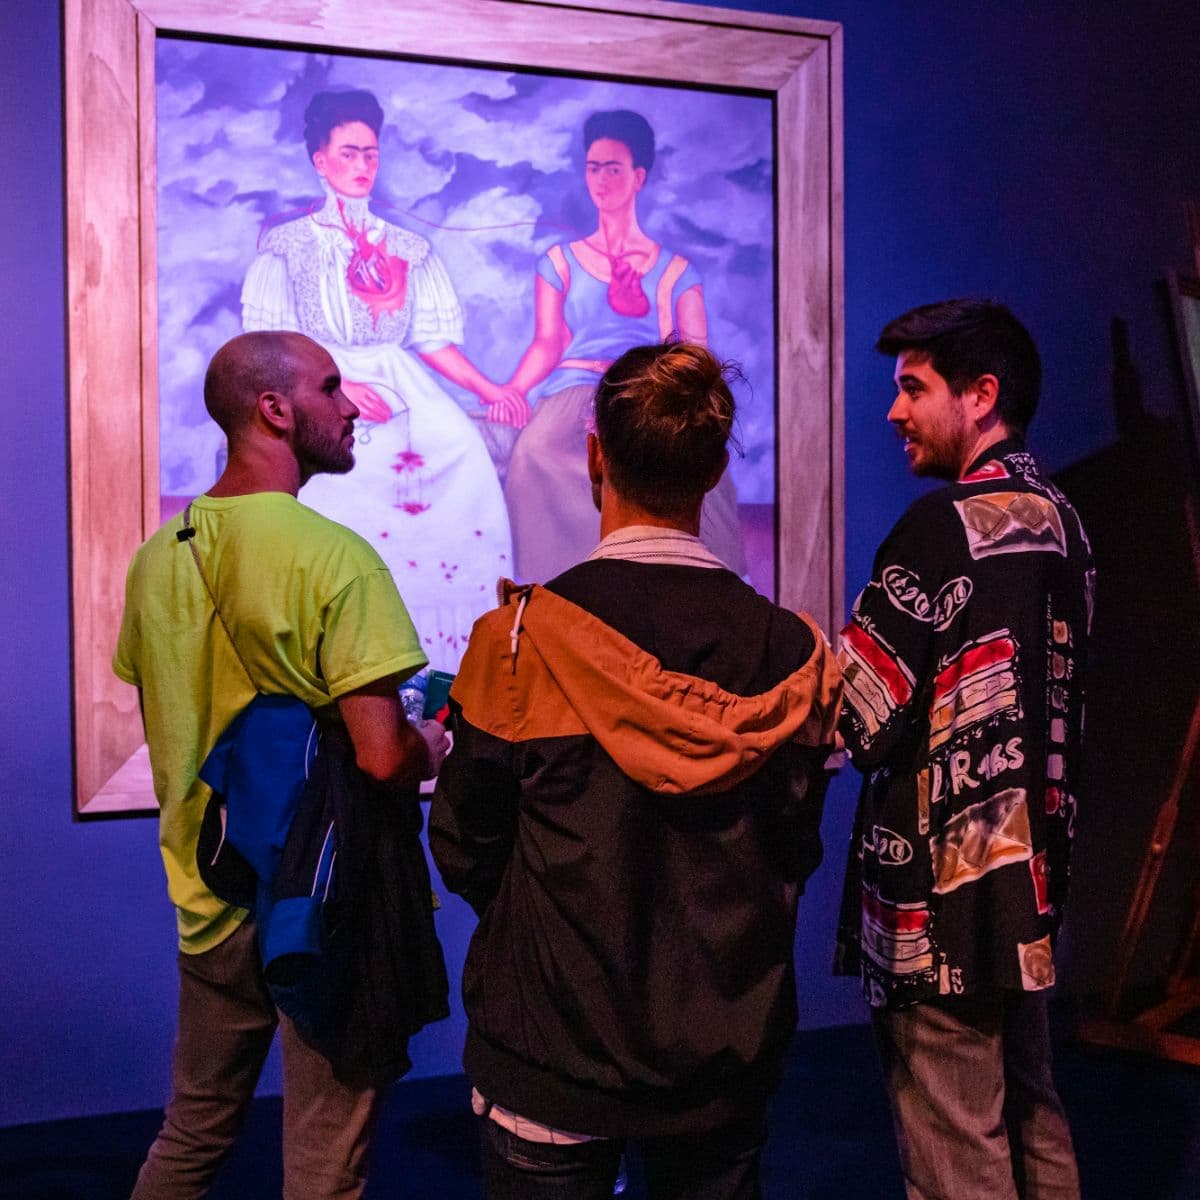 Visitors at the Frida & Diego Immersive Experience in London